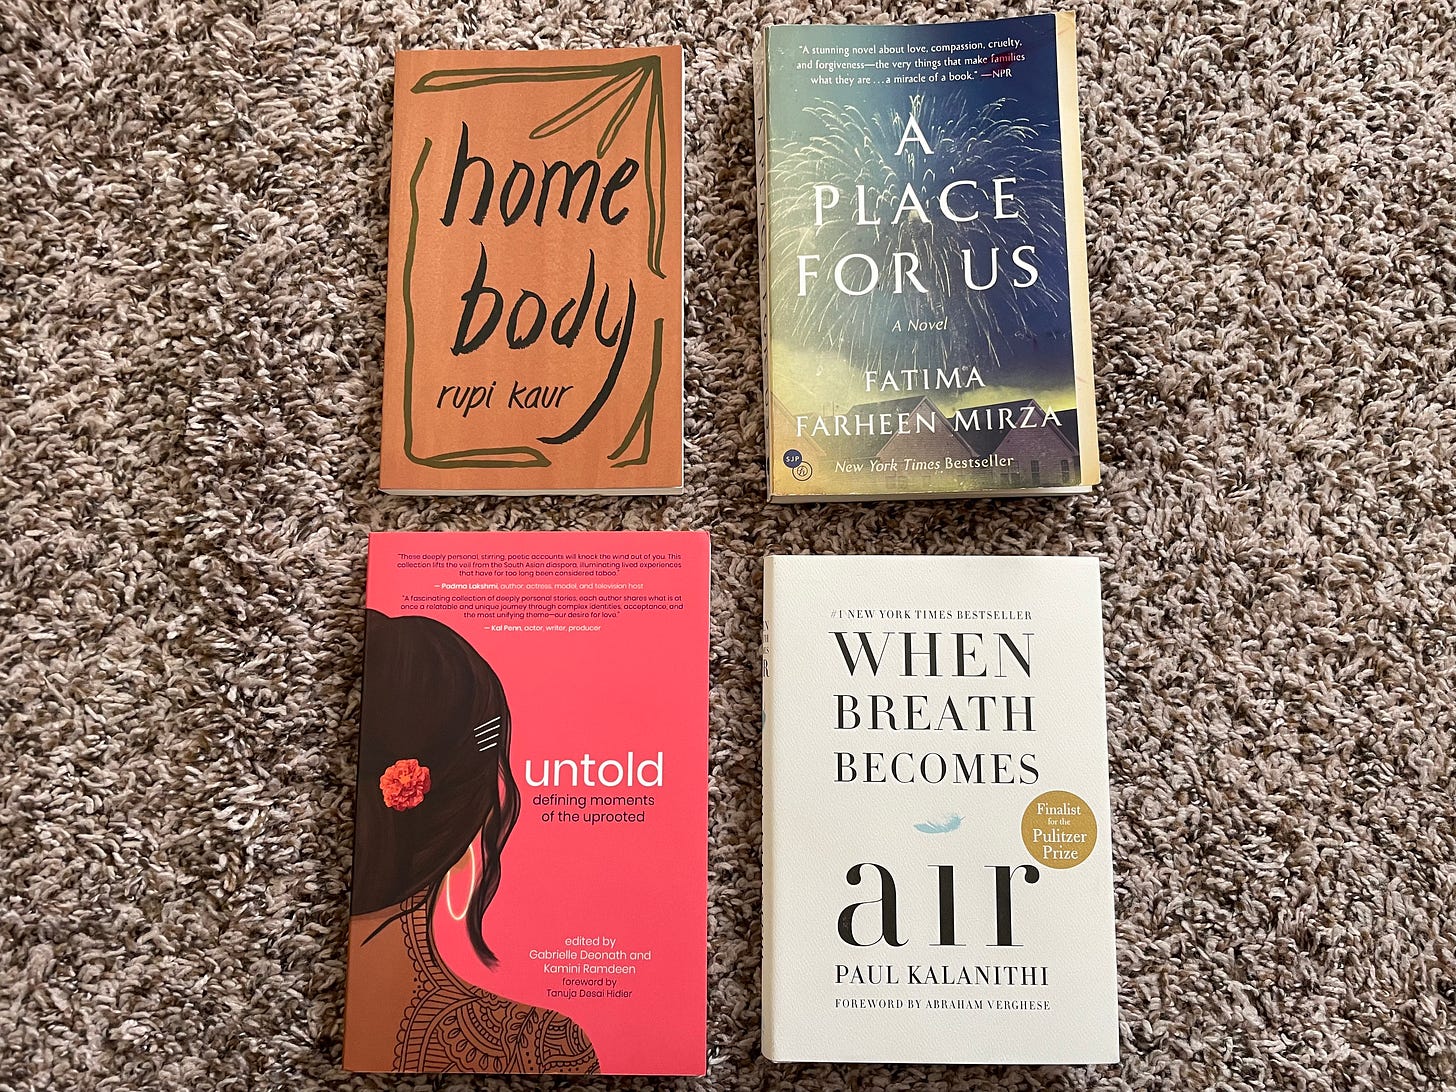 Four books shown atop a beige carpet: Rupi Kaur’s Home Body, Fatima Farheen Mirza’s A Place for Us, Brown Girl Magazine’s Untold, and Paul Kalanithi’s When Breath Becomes Air. 